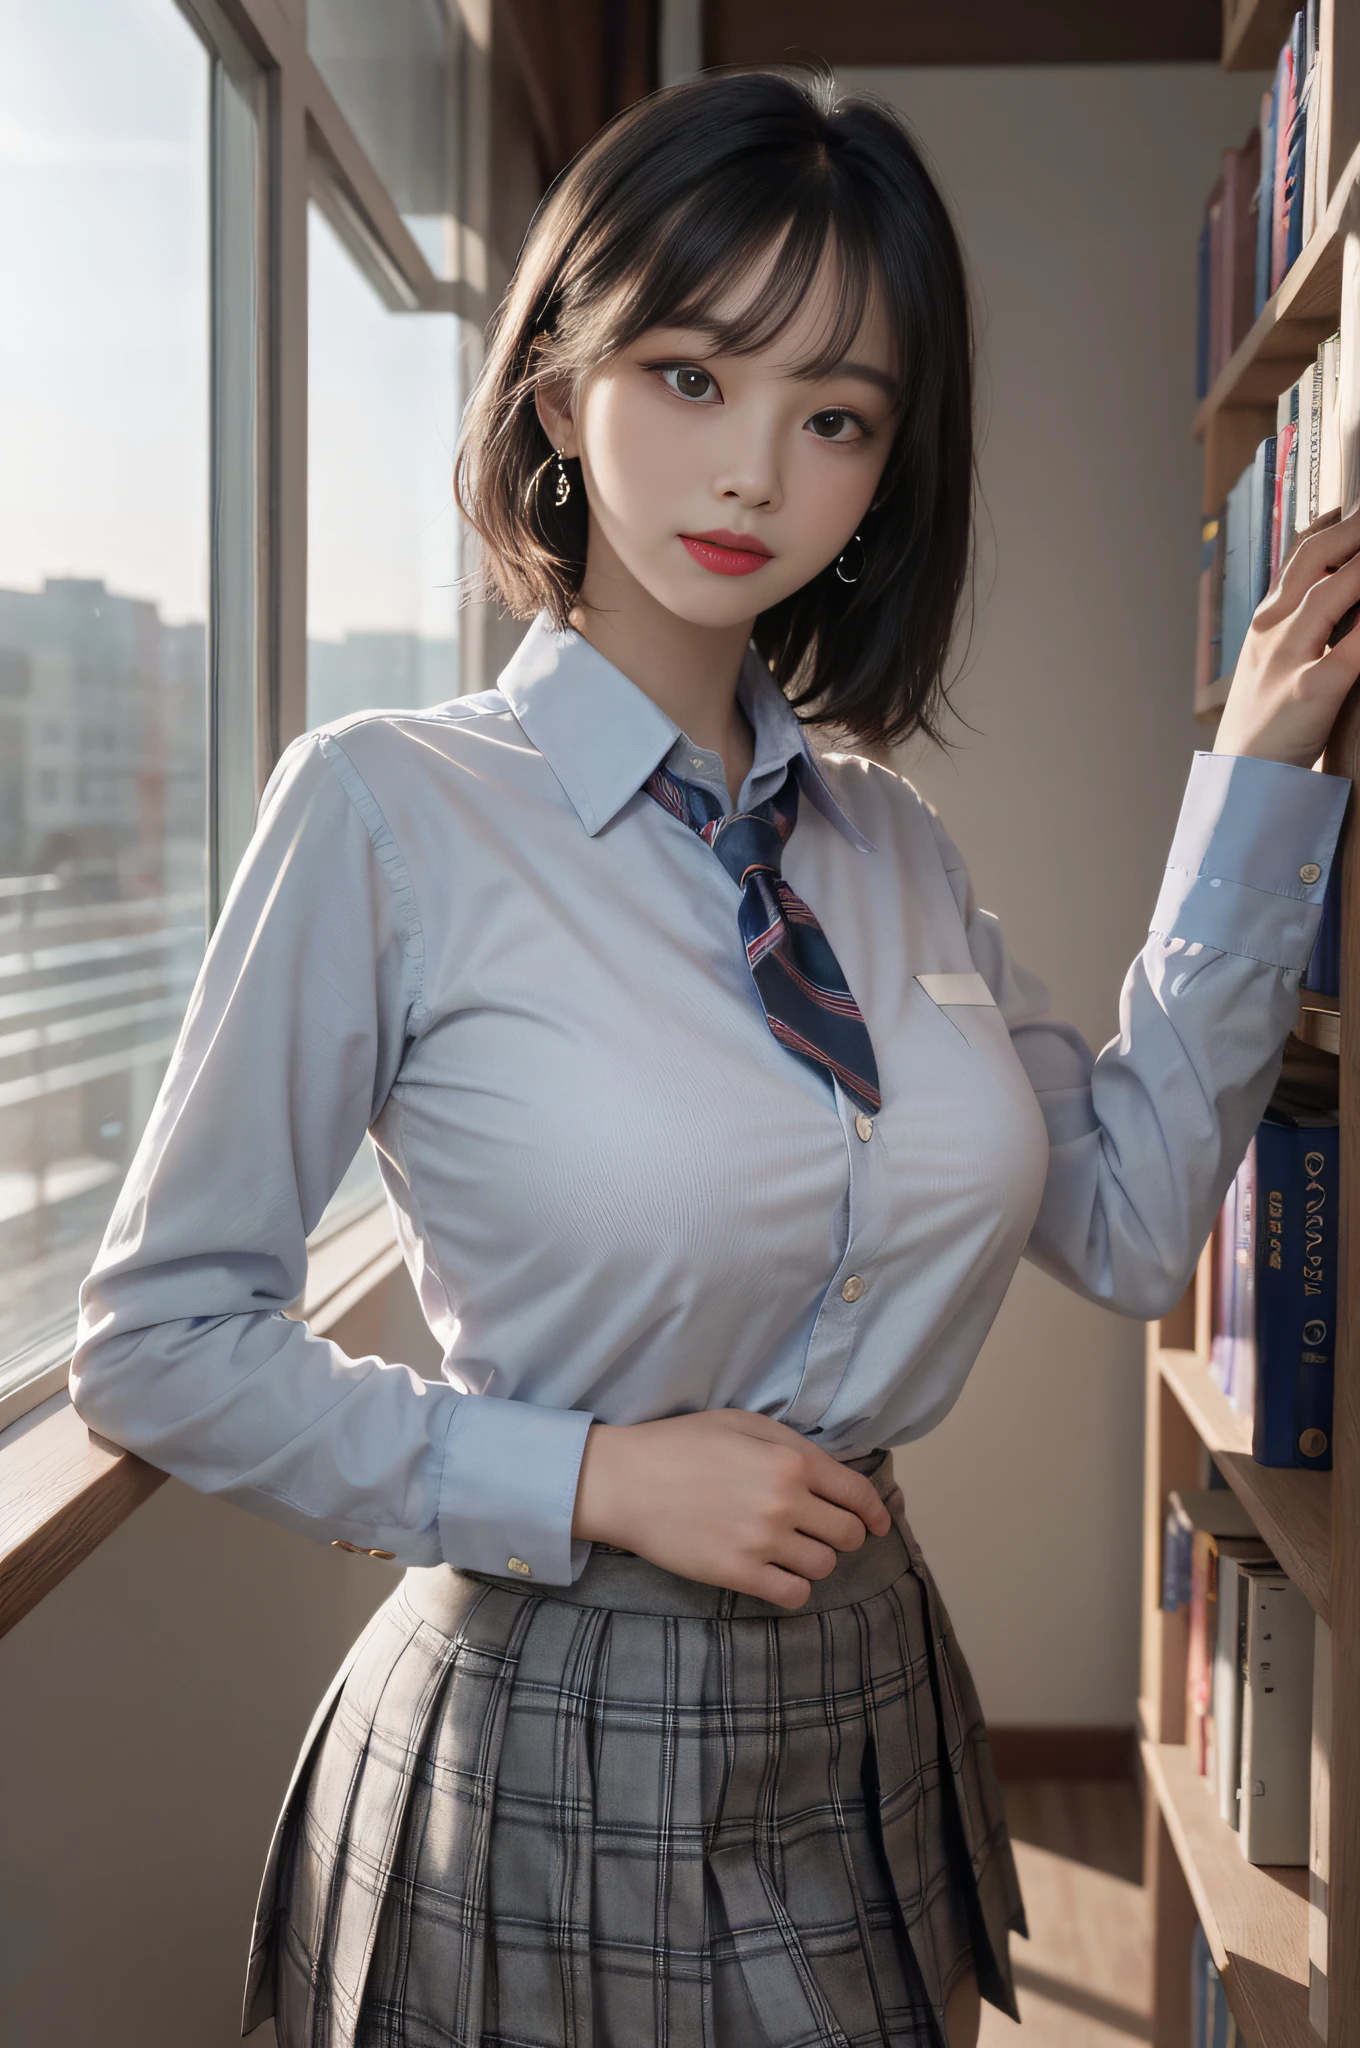 Best image quality, RAW photo, super high resolution, taken from the side, gentle smile, 16 years old Korean, very big breasts, tie, ribbon, school uniform, collared shirt,  shirt, plaid skirt, fair skin, shiny white skin, short bob, bright silver hair, bright gray hair, neatly aligned bangs, beautiful eyes, beautiful eyes of random colors, very thin lips, beautiful eyes with details, Elongated eyes, pale pink blush, long eyelashes, beautiful double eyelids, eyeshadow, earrings, night school, dimly lit library at night, standing next to a bookshelf